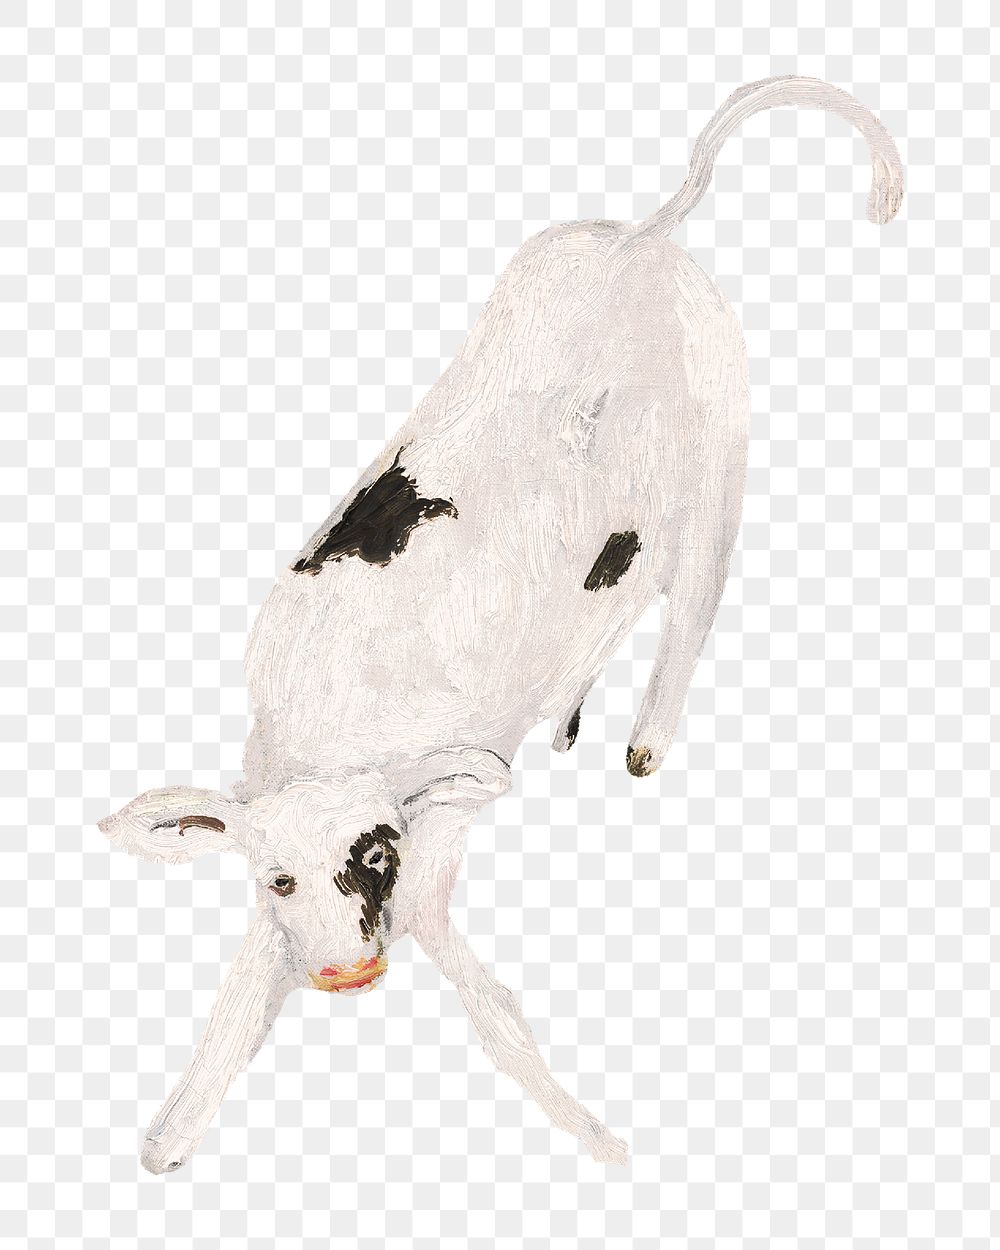 Calf png baby cow, animal illustration by Cyprian Majernik on transparent background. Remixed by rawpixel.